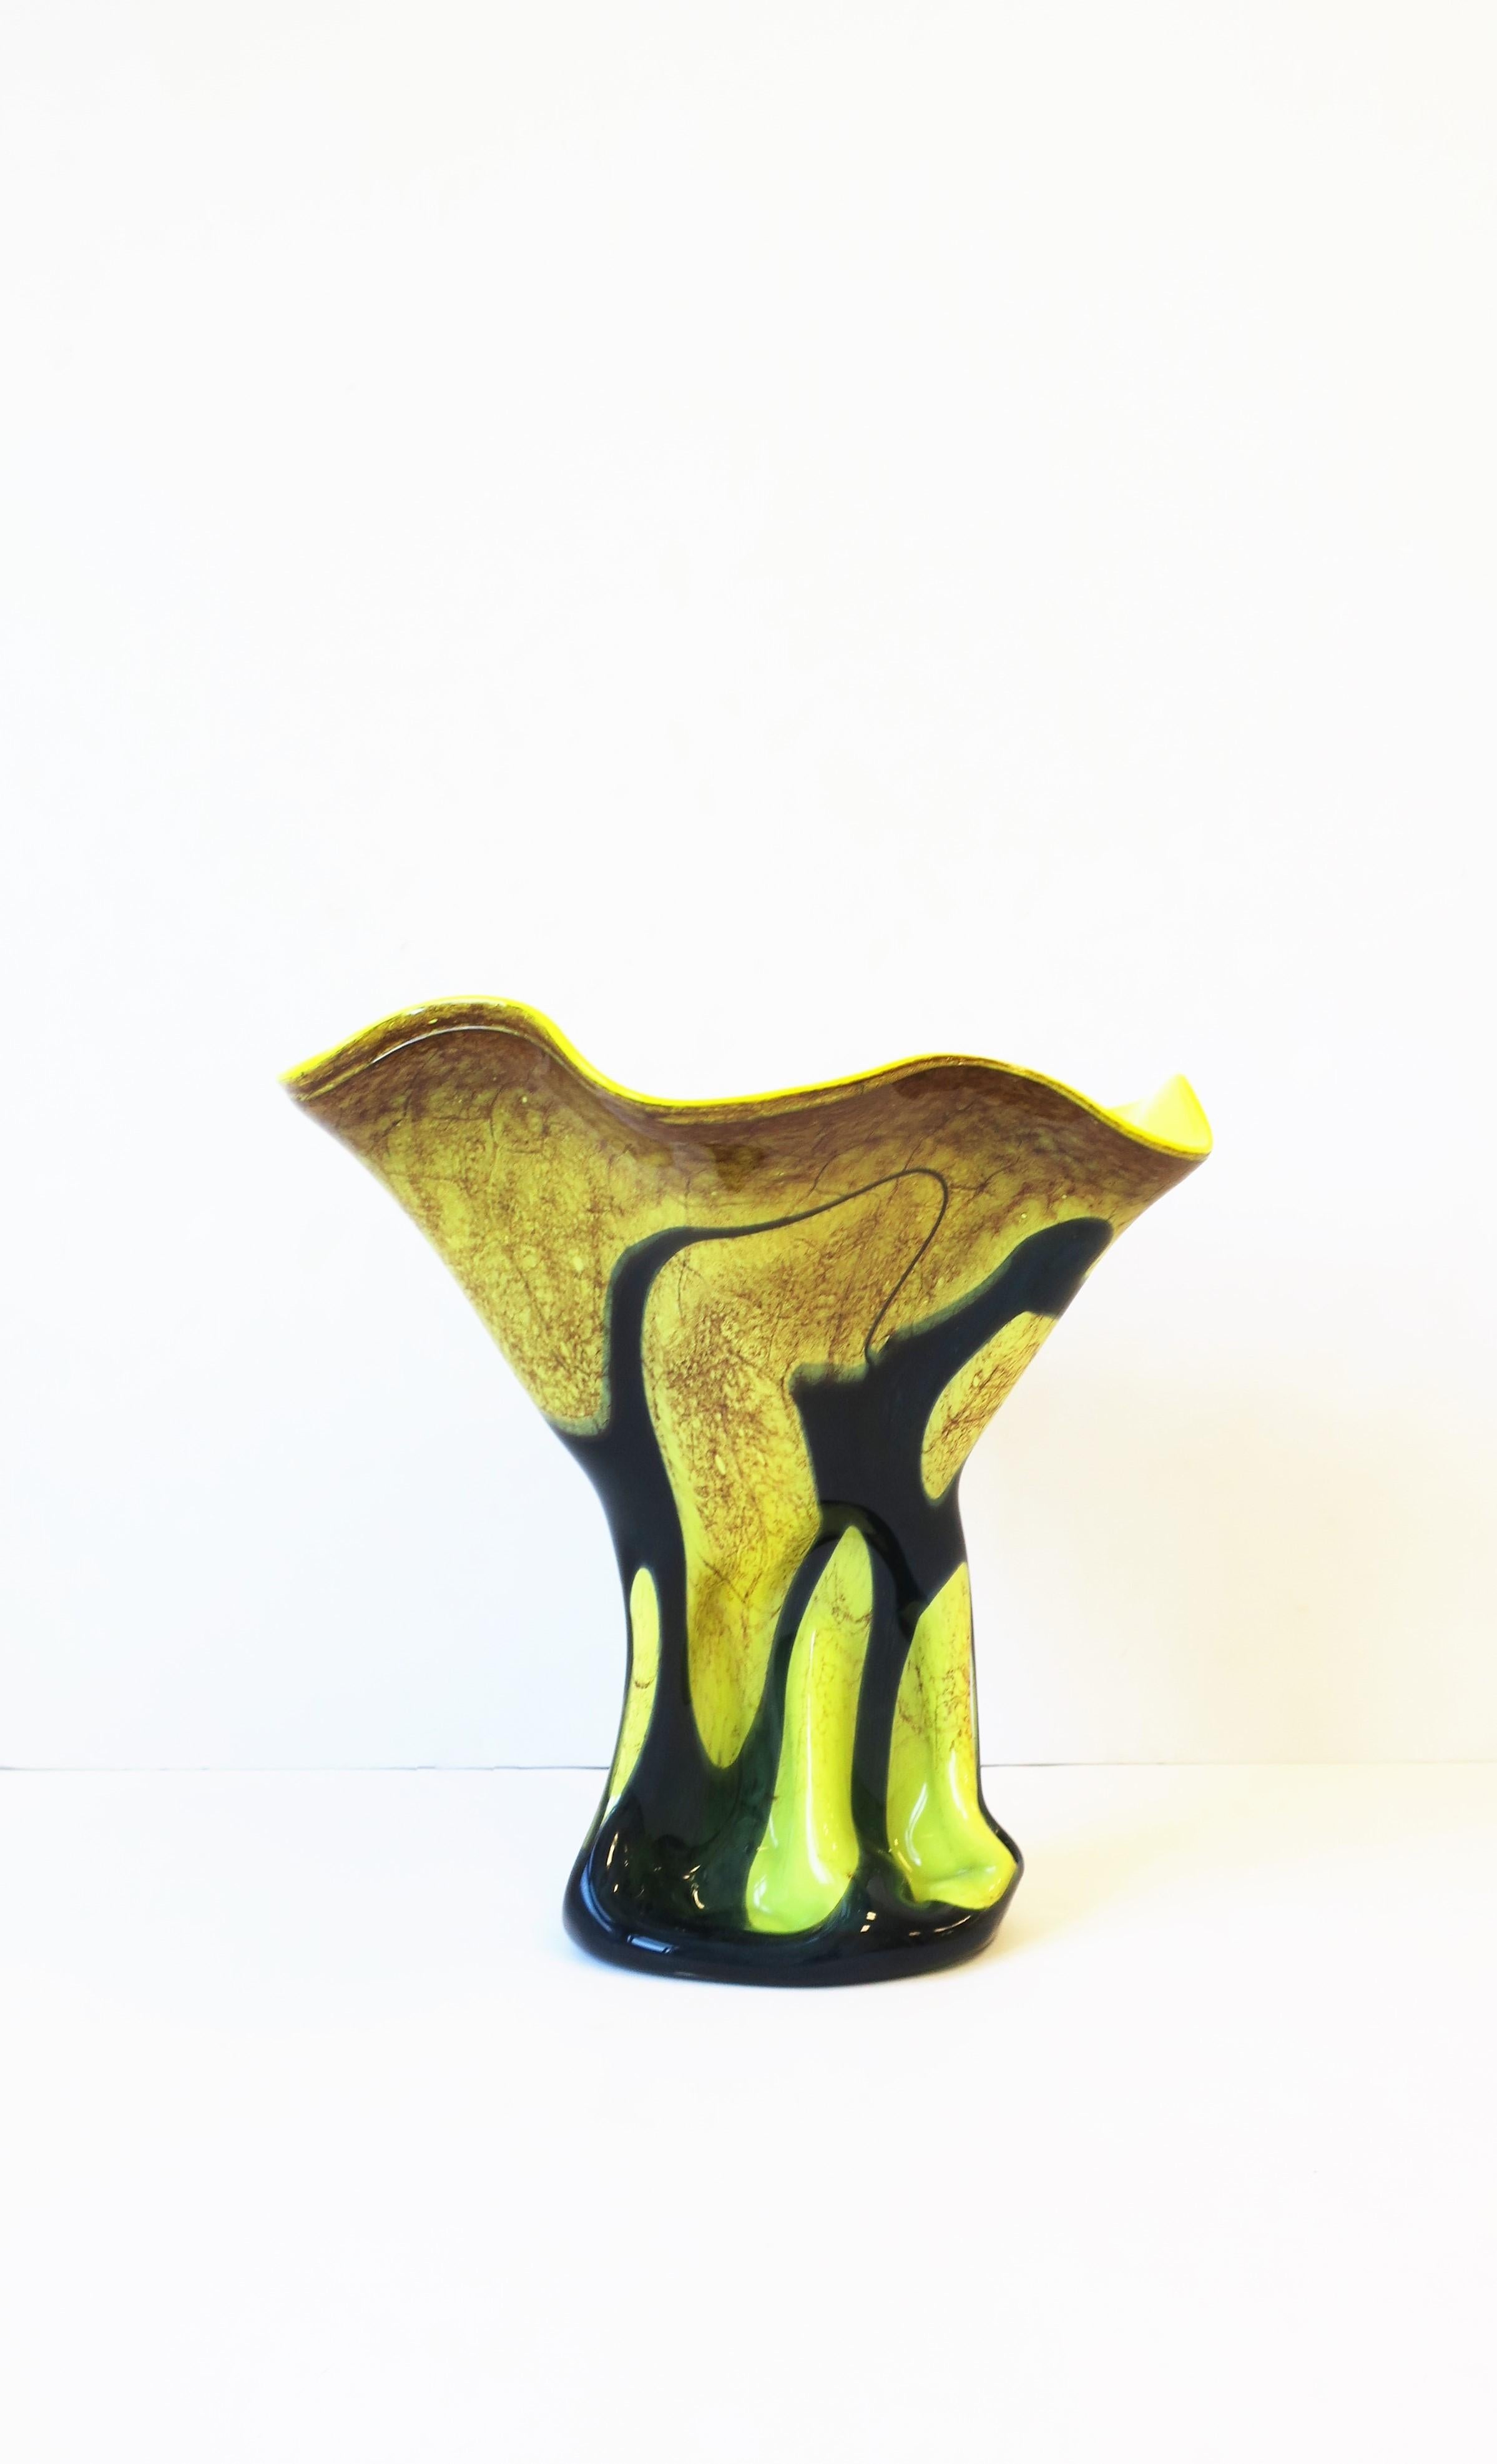 Hand-Crafted Organic Modern Art Glass Sculpture Vase For Sale